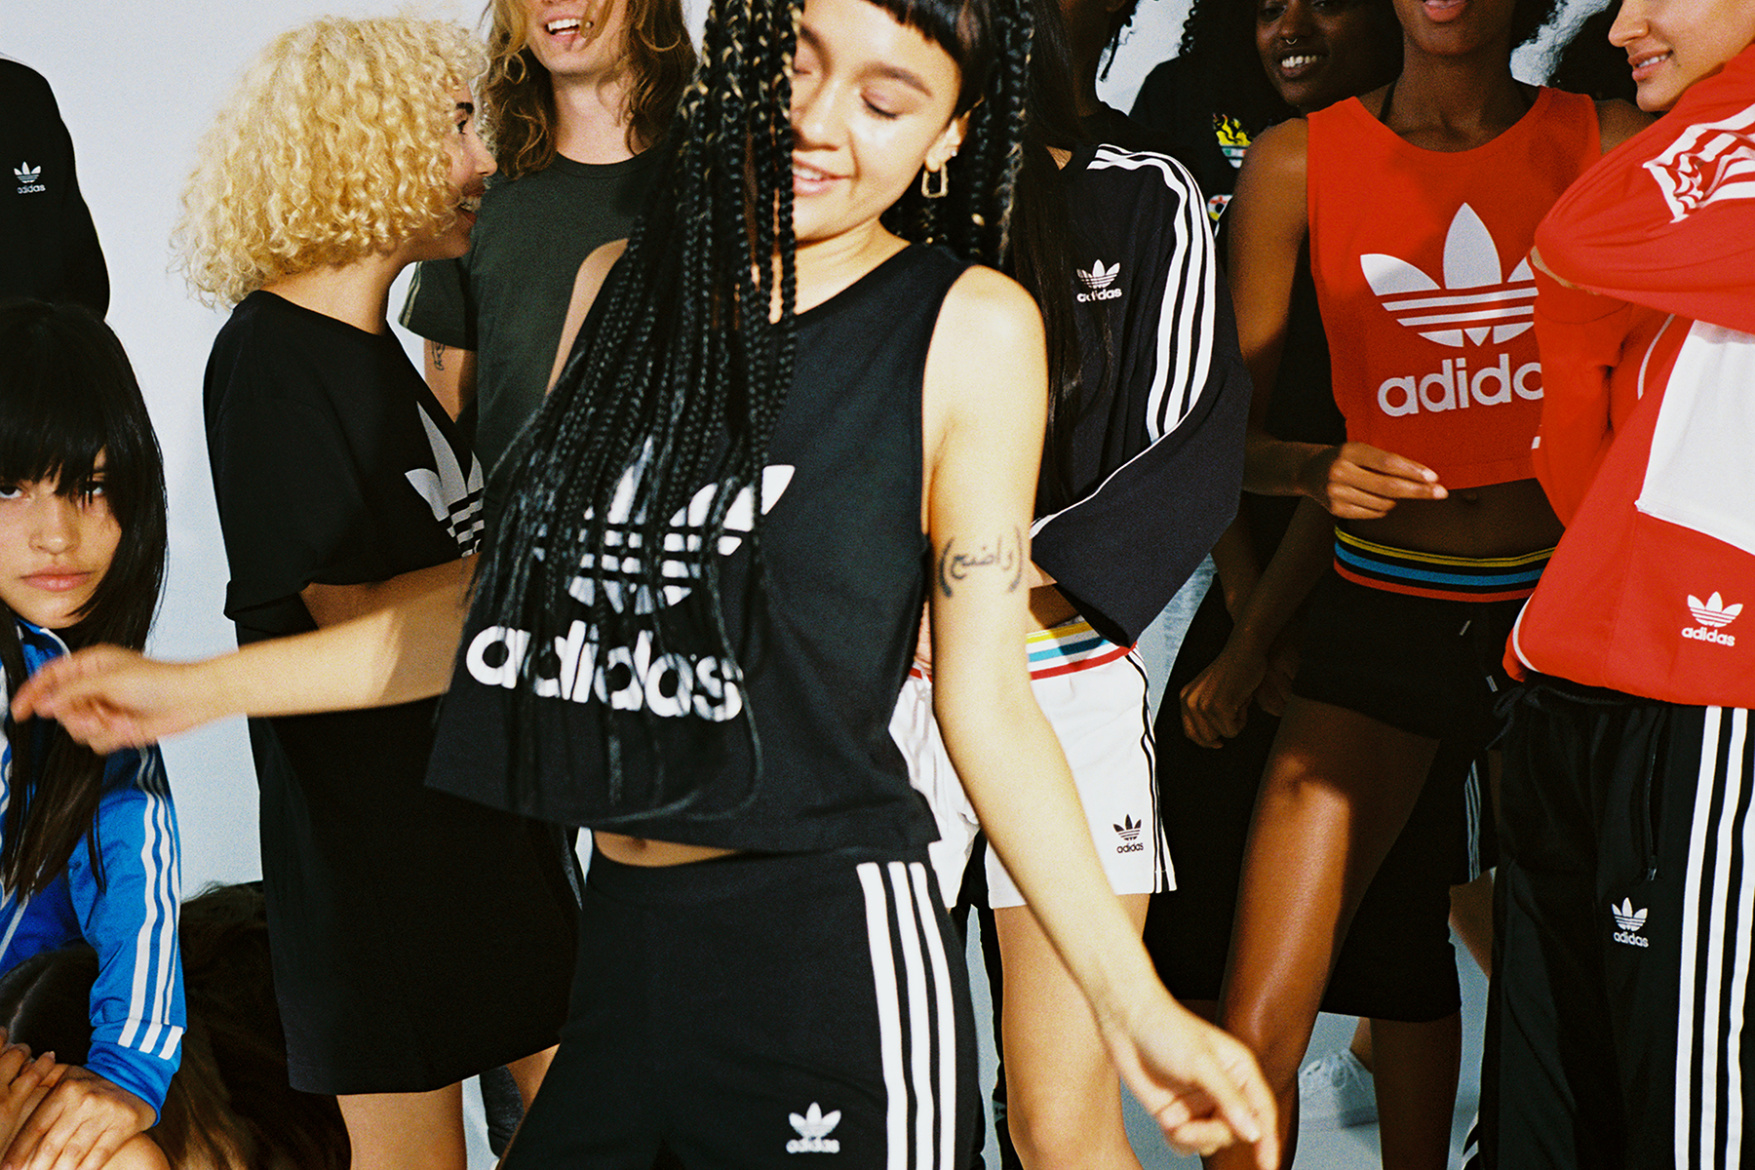 urban-outfitters-adidas-we-the-future-8